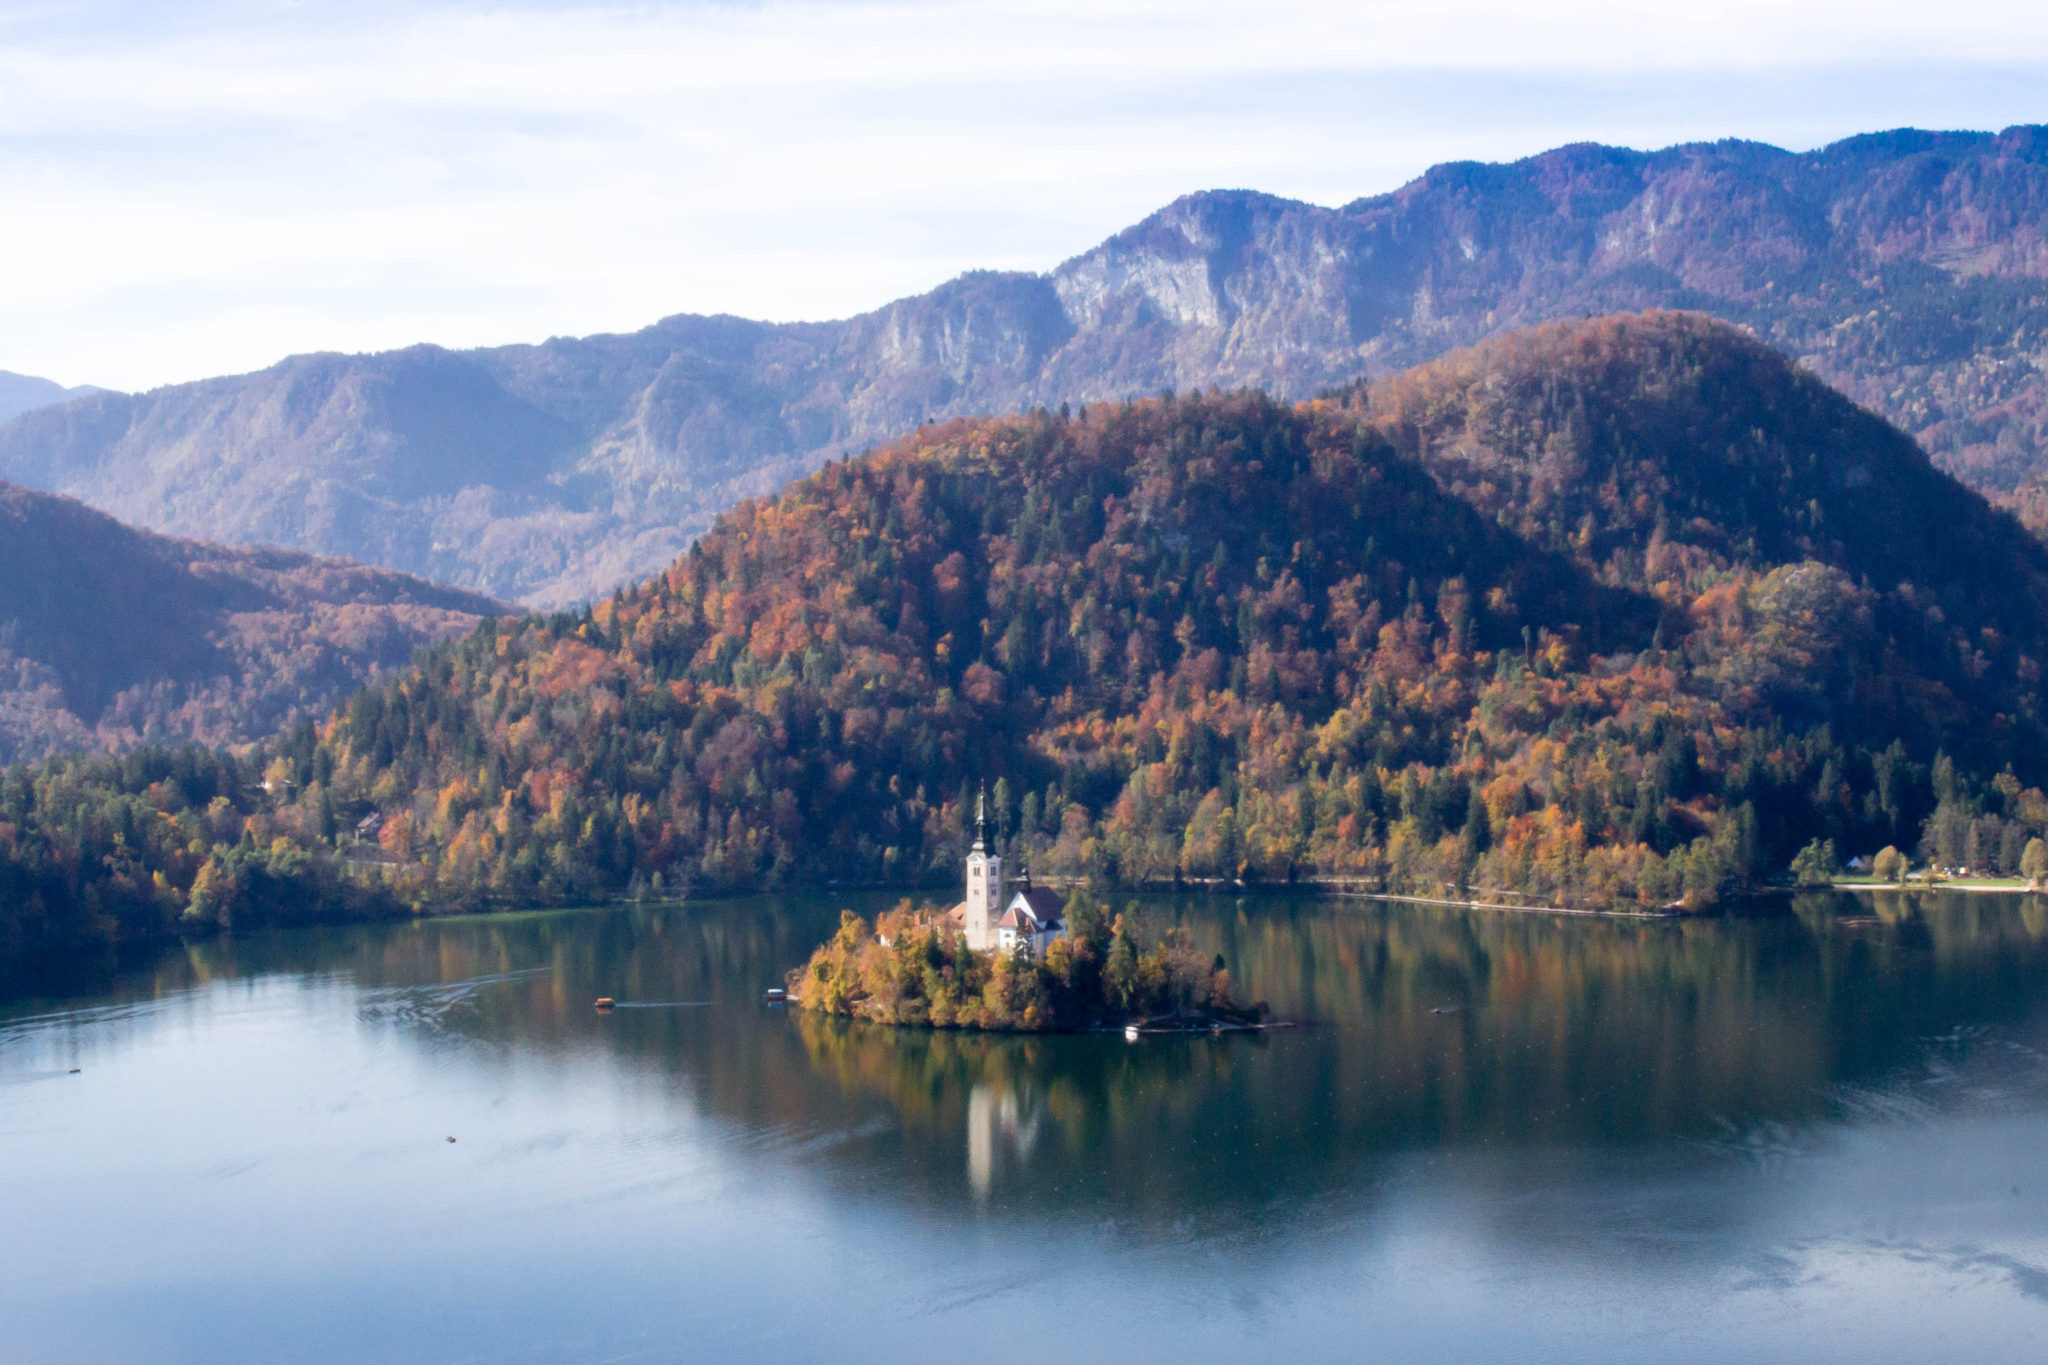 Lake Bled and Vintgar Gorge in Slovenia makes for a fairy-tale like destination as a day trip. Between a church set in the middle of a lake, a castle perch high on a cliff, and the stunning boardwalk through the gorge, Bled is a fantastic place to explore Europe from #Europe #Slovenia #Castle